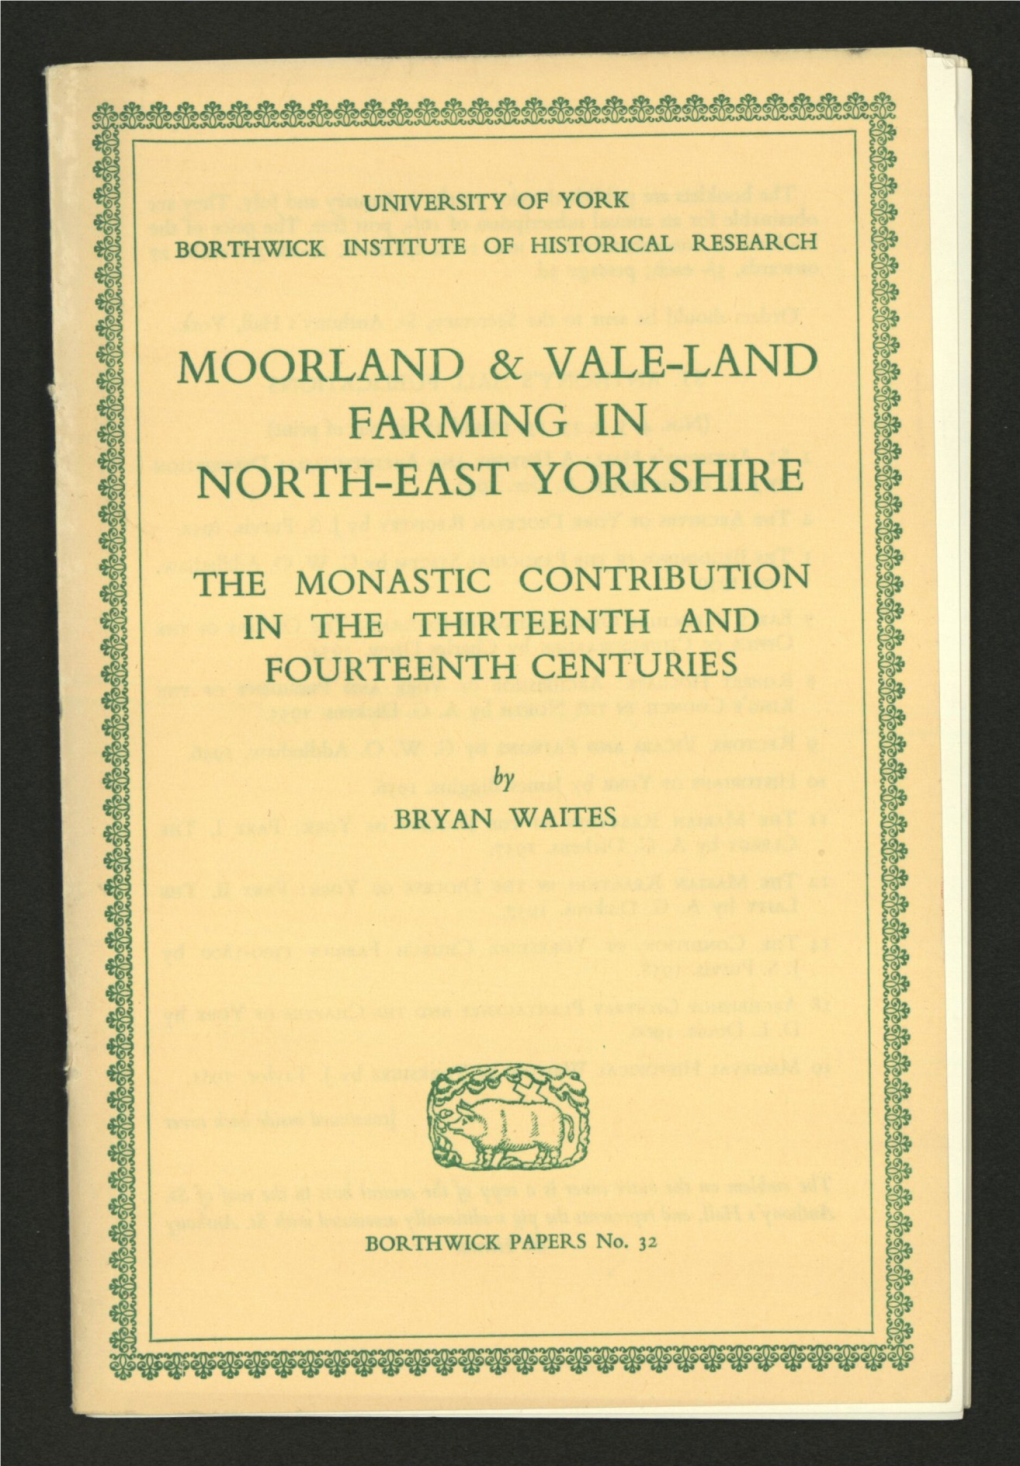 Moorland & Vale-Land Farming in North-East